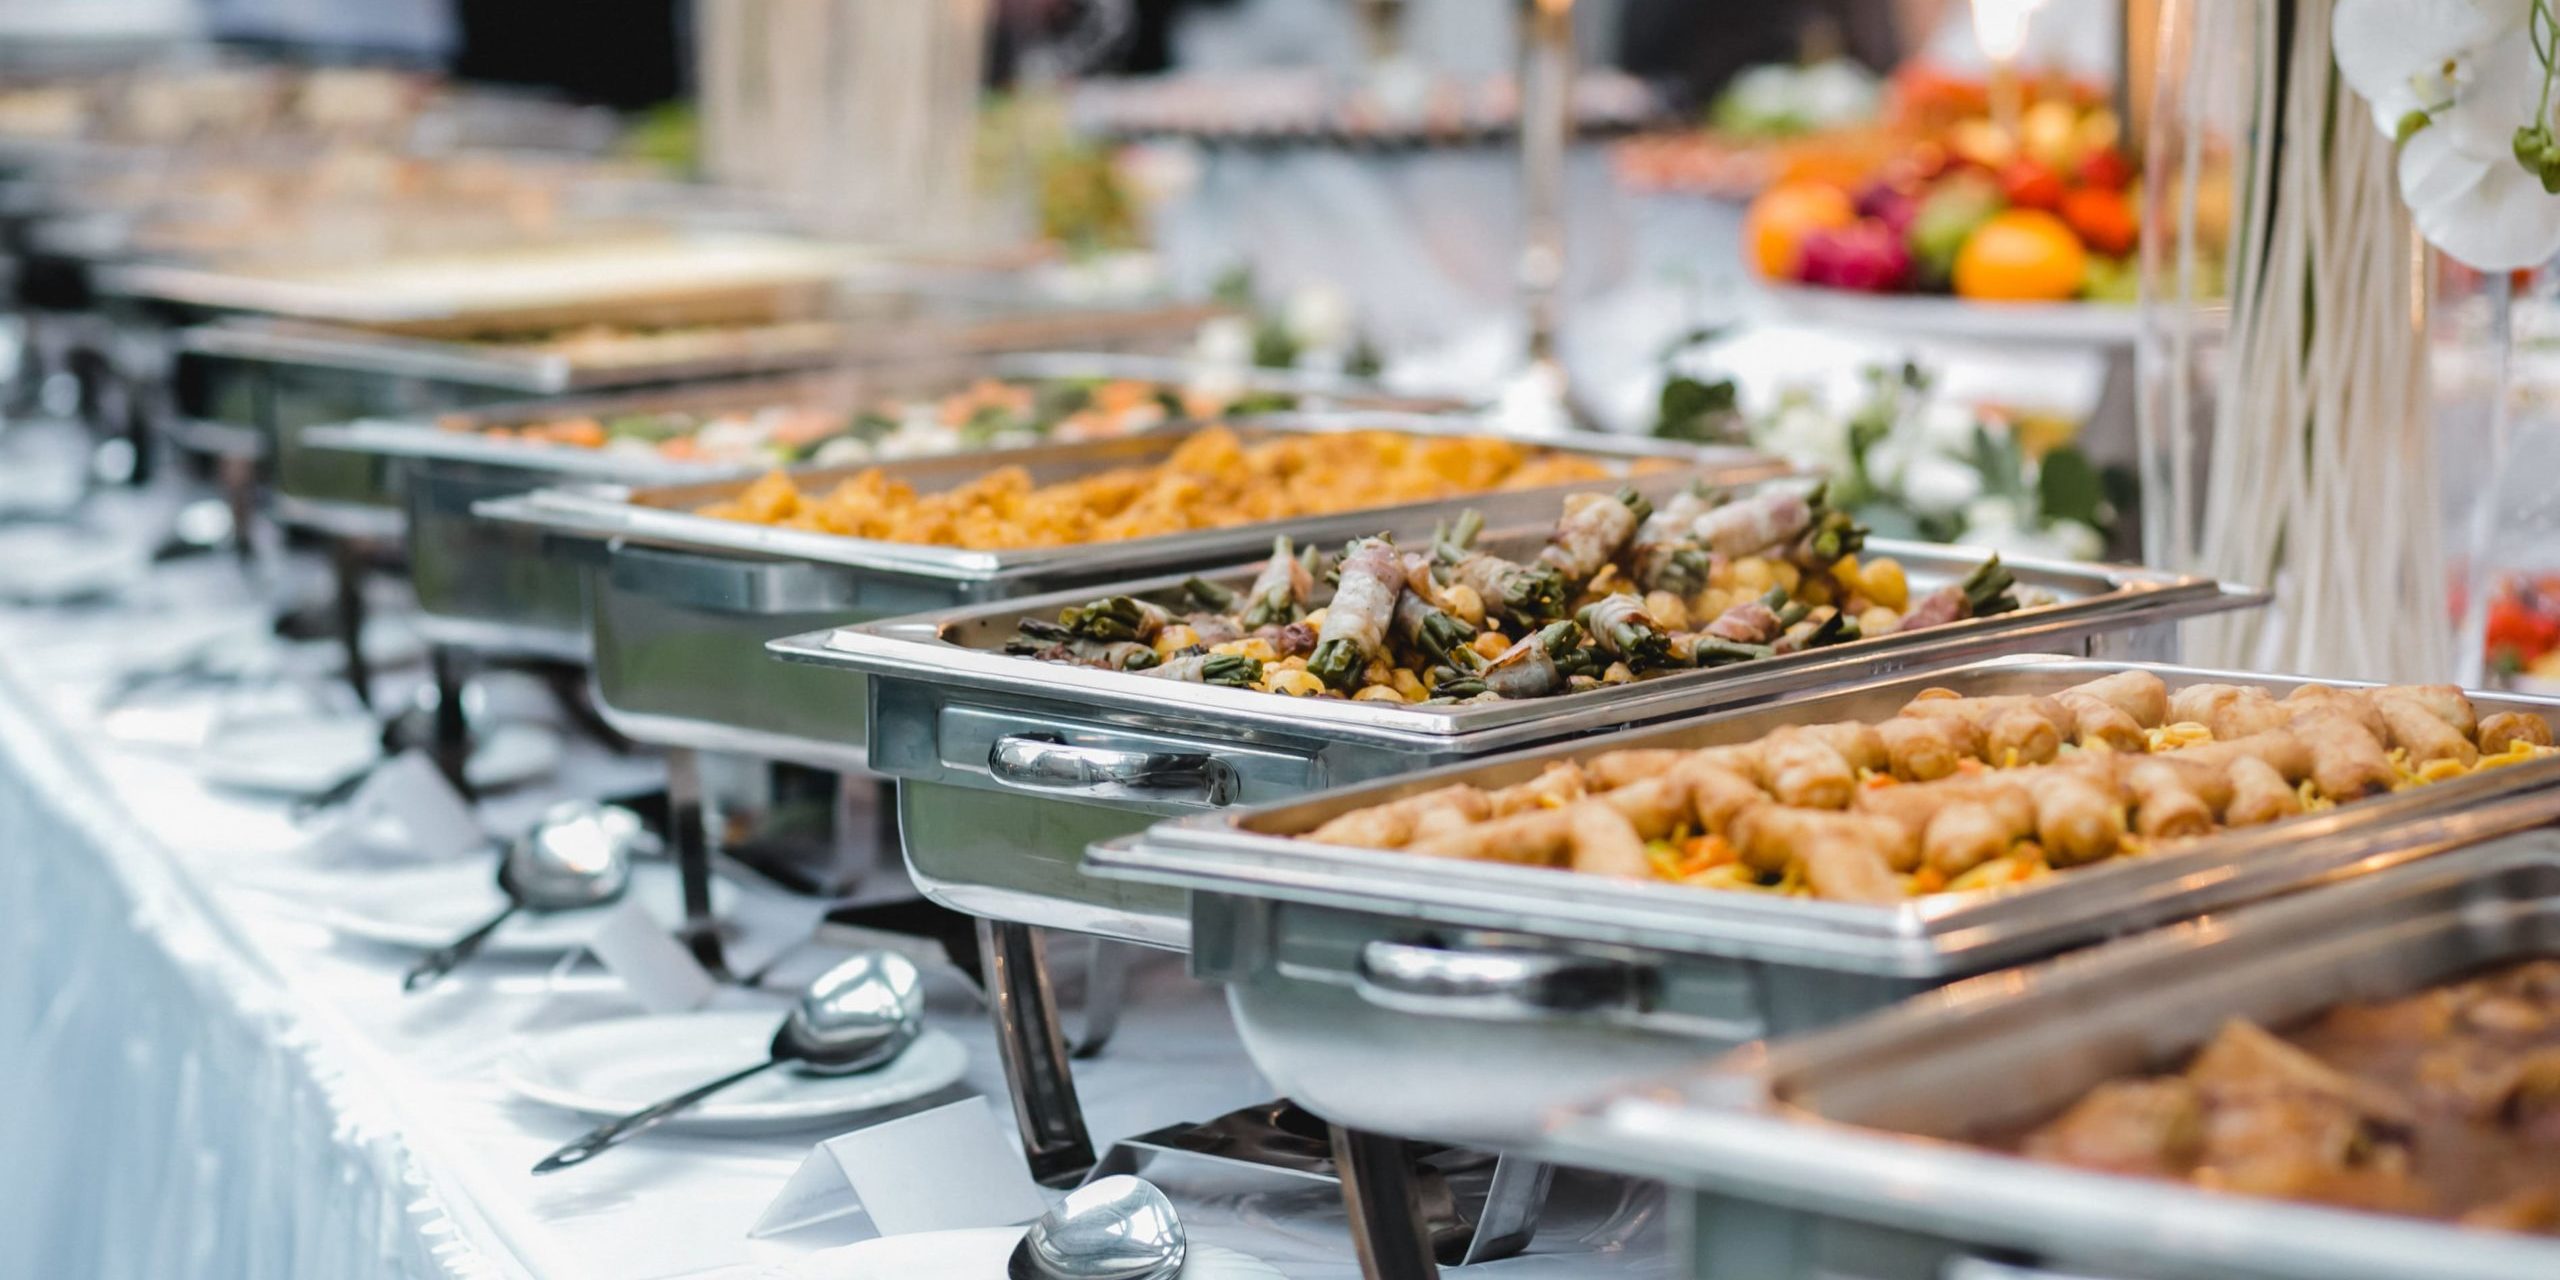 What are the different types of Catering offered at SudsnSoda?